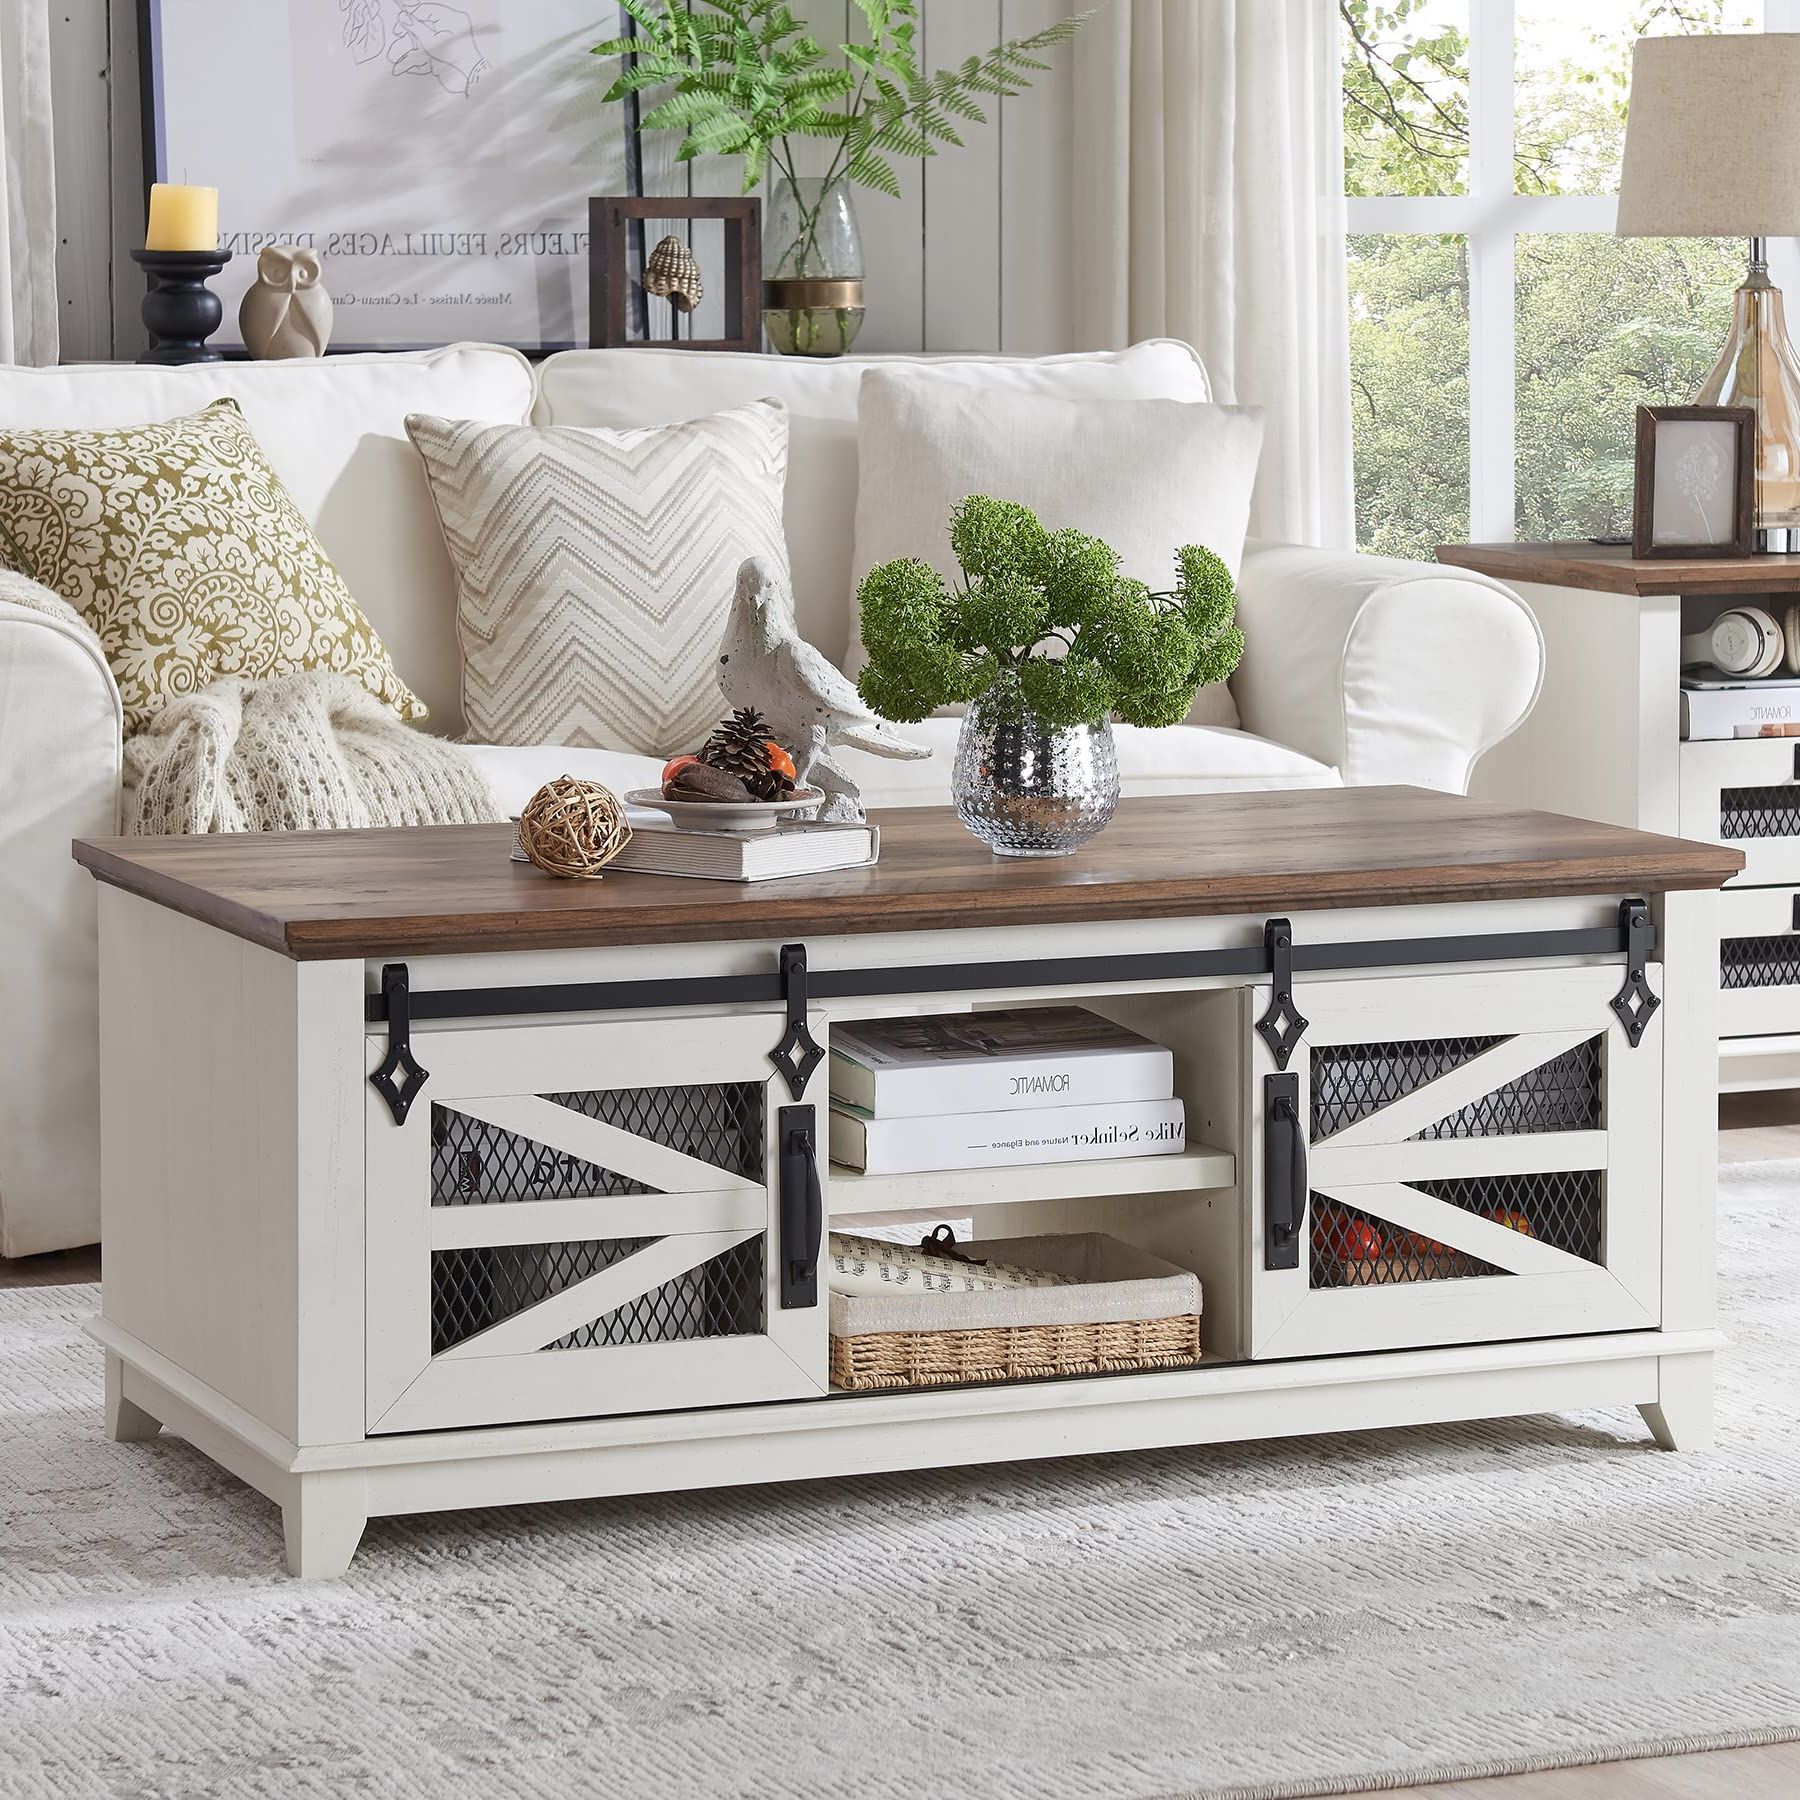 Most Recently Released Coffee Tables With Storage And Barn Doors For Amazon: Okd 48'' Coffee Table With Storage & Sliding Barn Doors,  Farmhouse & Industrial Cocktail Table W/adjustable Shelves, Modern  Rectangular Rustic Living Room, Meeting Room, Antique White : Home & Kitchen (Photo 1 of 10)